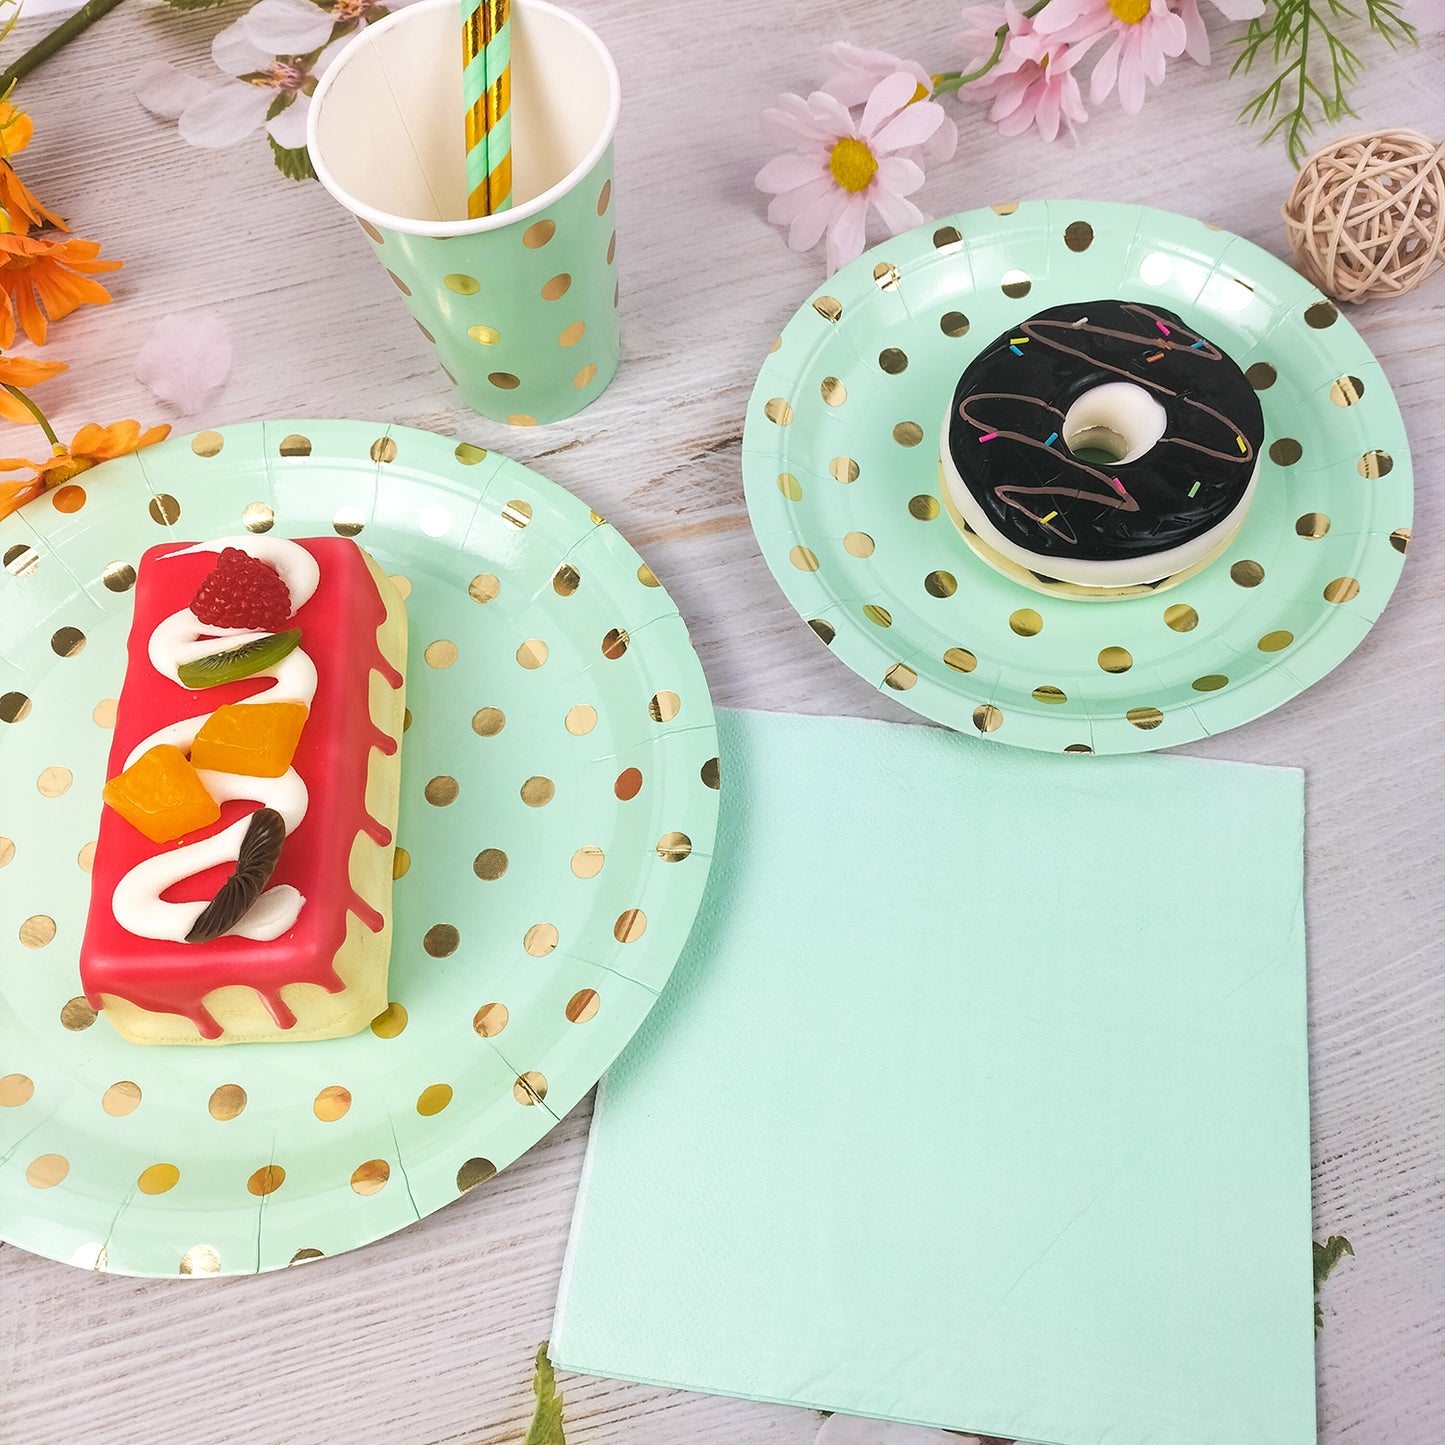 Gold Poker Dot Mint Paper Plates Disposable Eco-Friendly Tableware Set for Wedding Birthday Party Supplier Happy New Year's Party 8pks